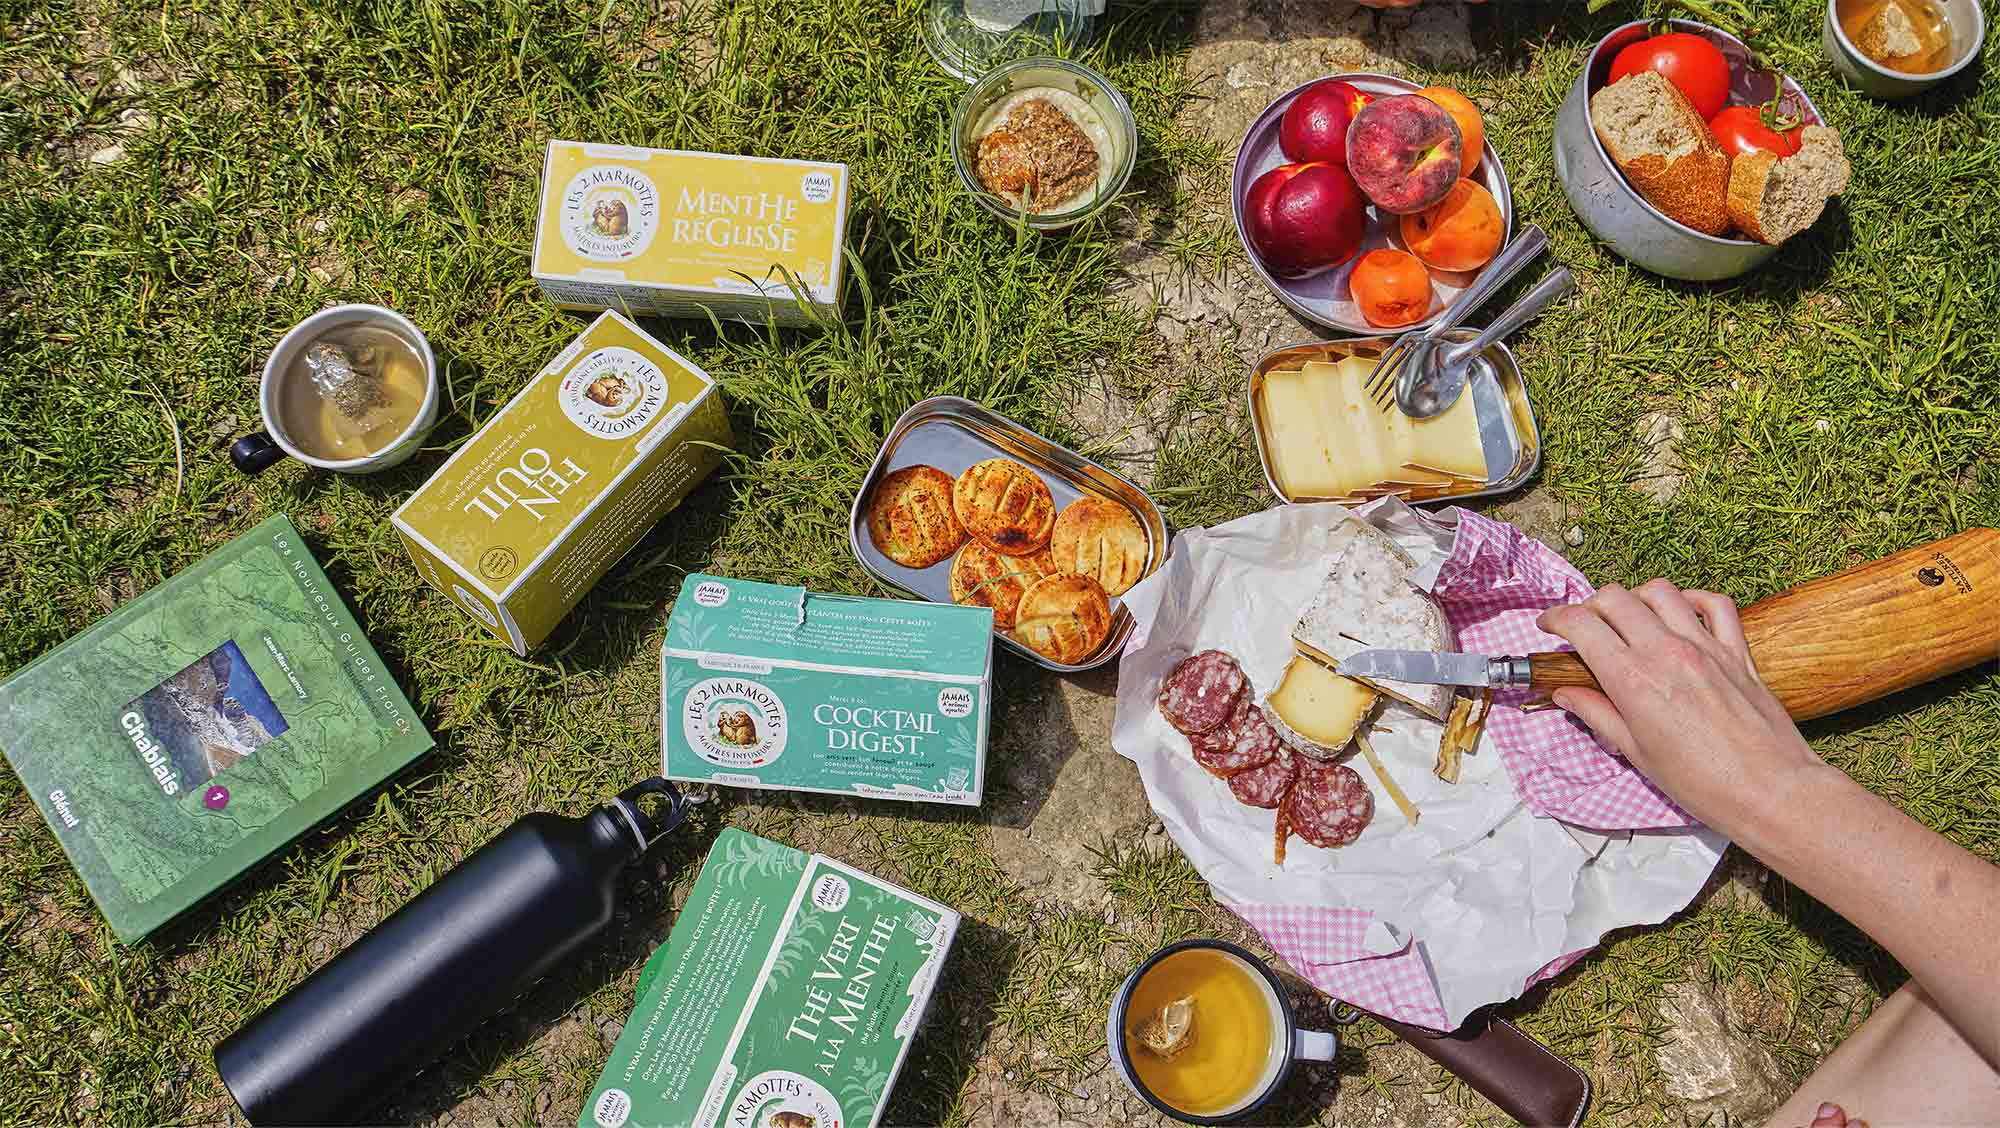 Healthy picnic for tired hikers